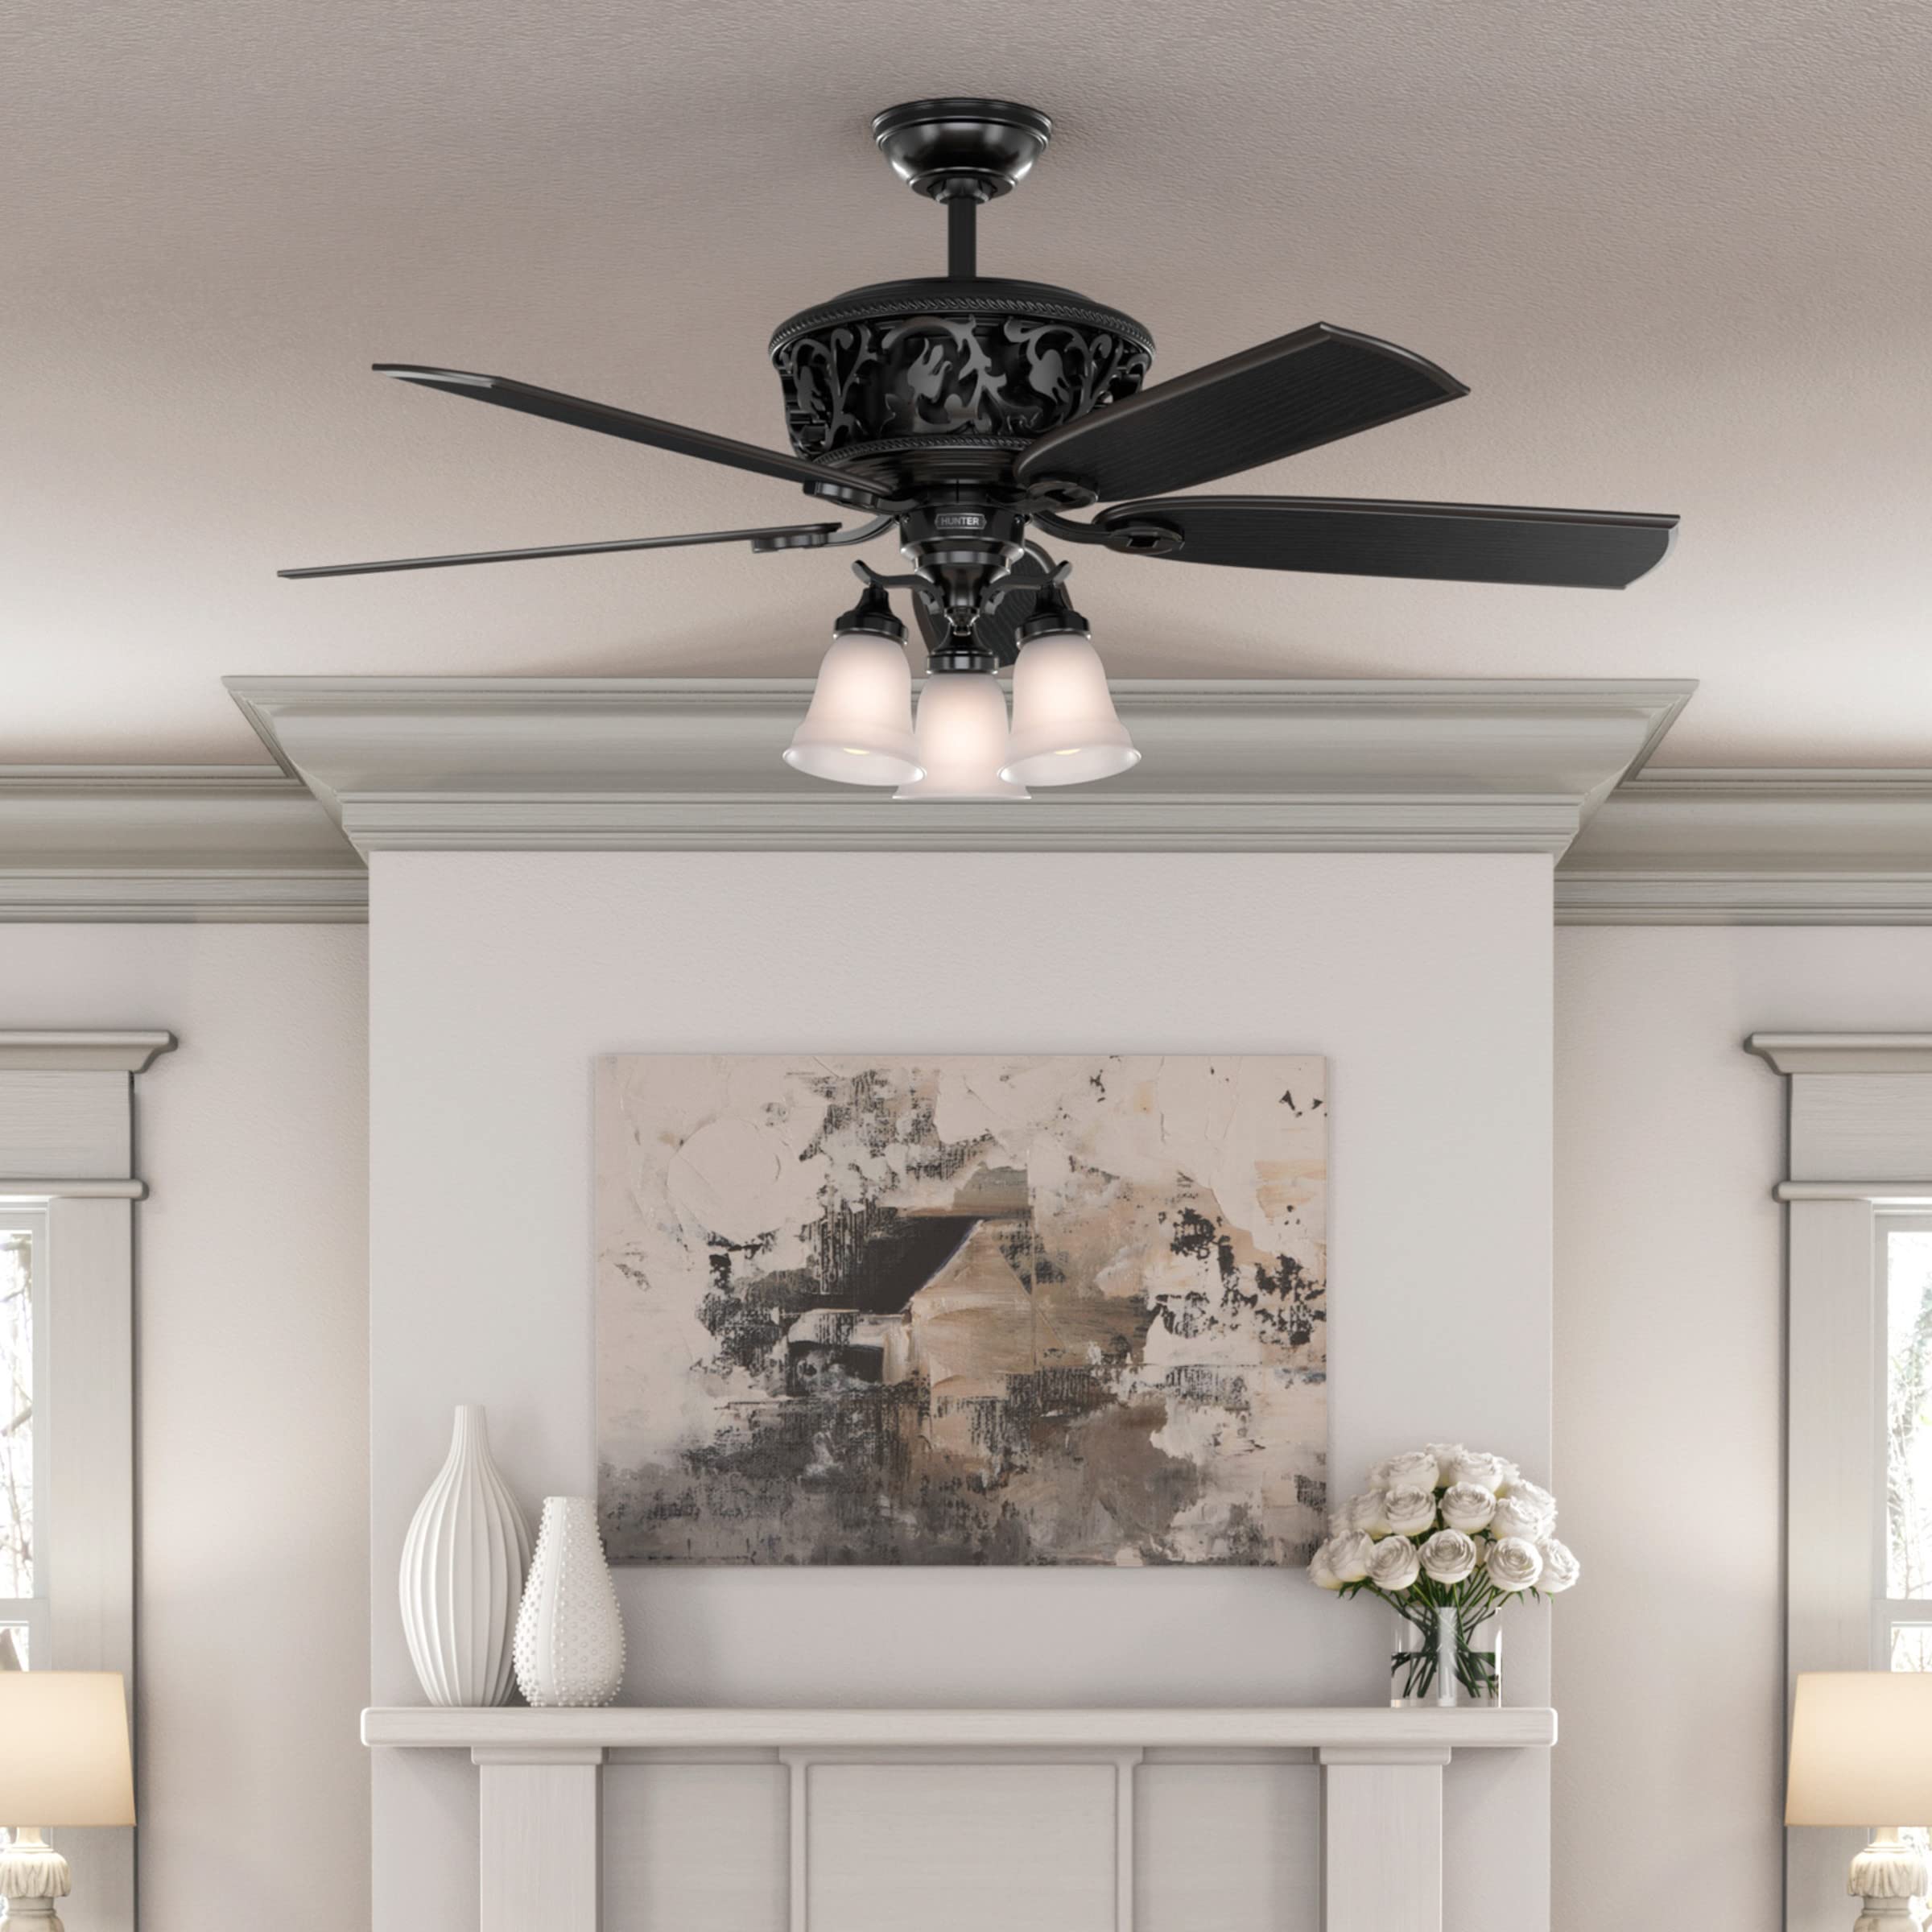 Hunter Fan Company, 59545, 54 inch Promenade Gloss Black Ceiling Fan with LED Light Kit and Handheld Remote